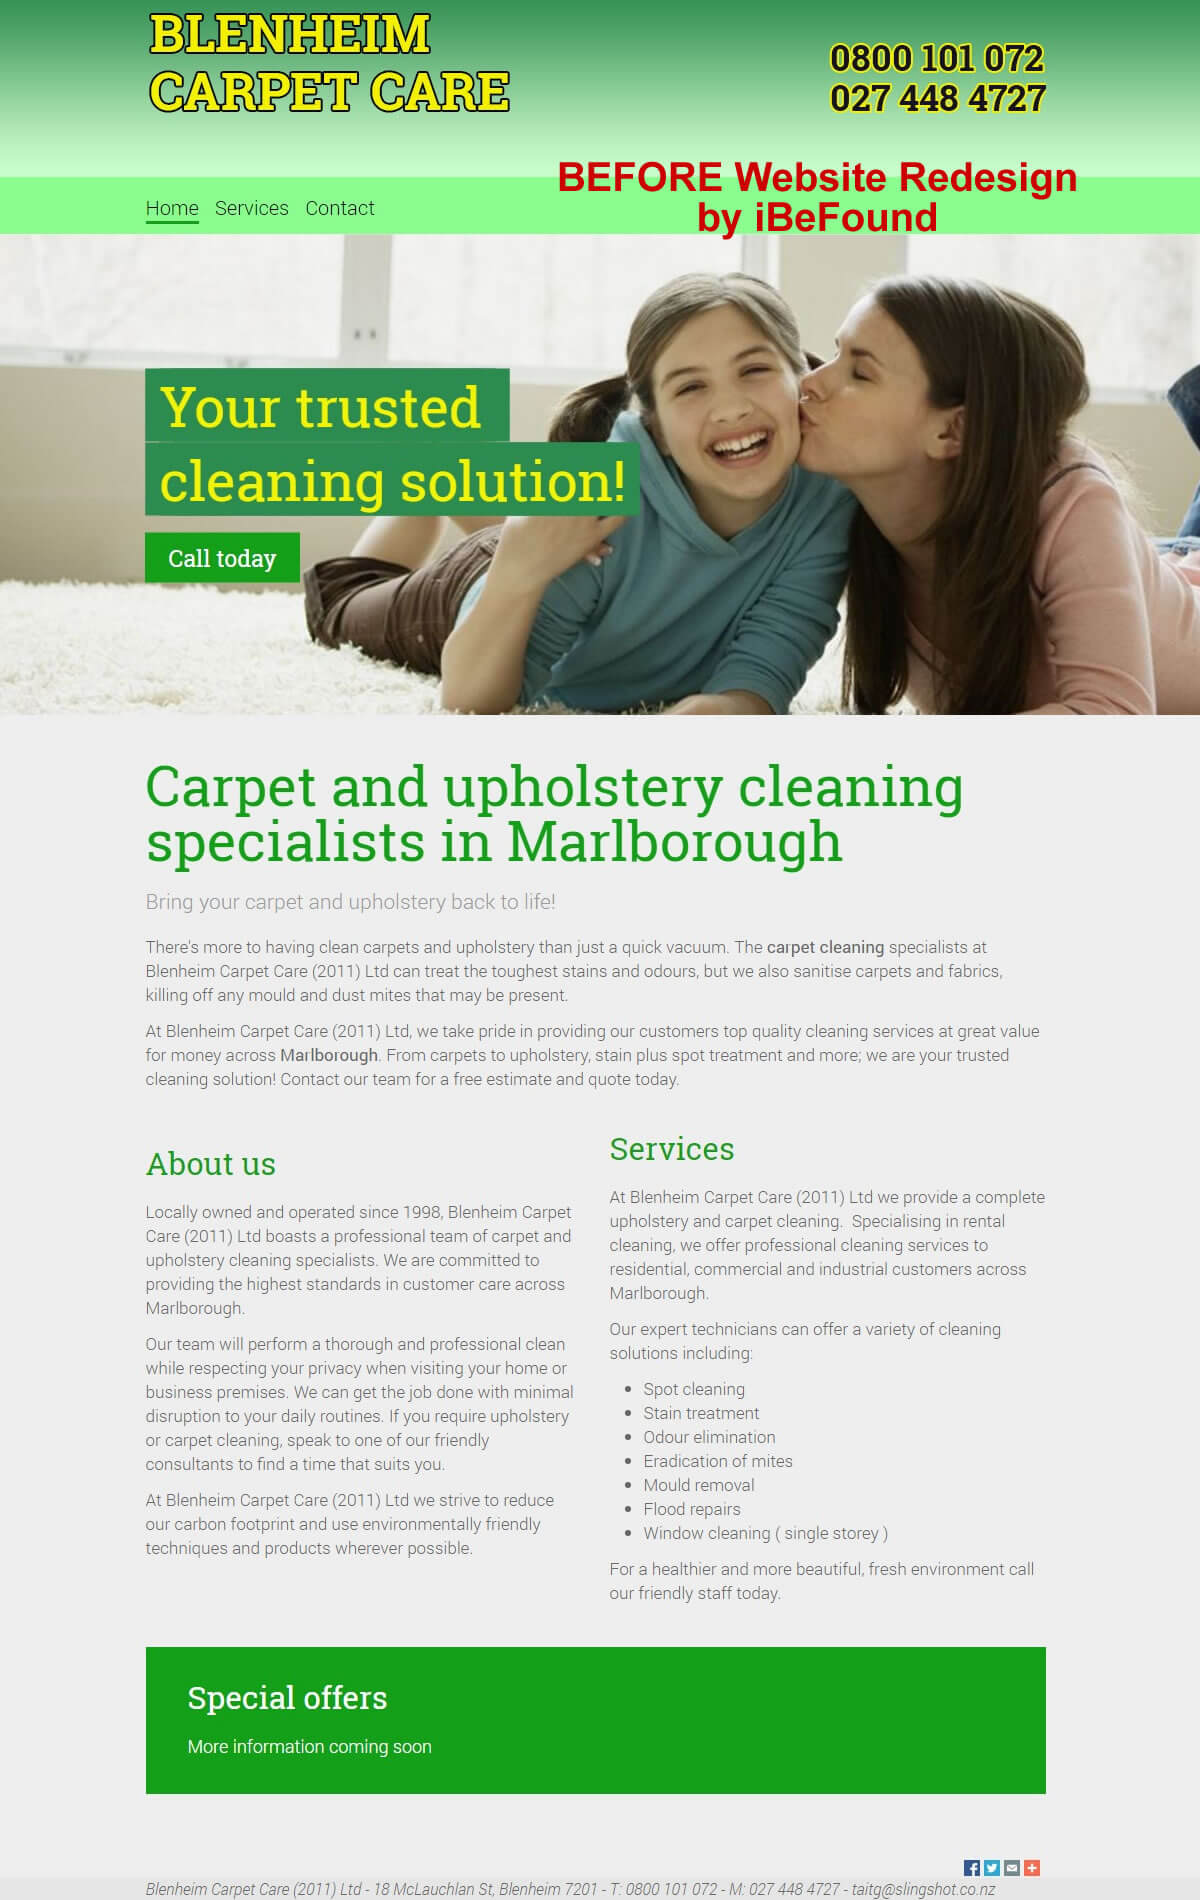 Homepage of Blenheim Carpet Care Before Website Redesign by iBeFound